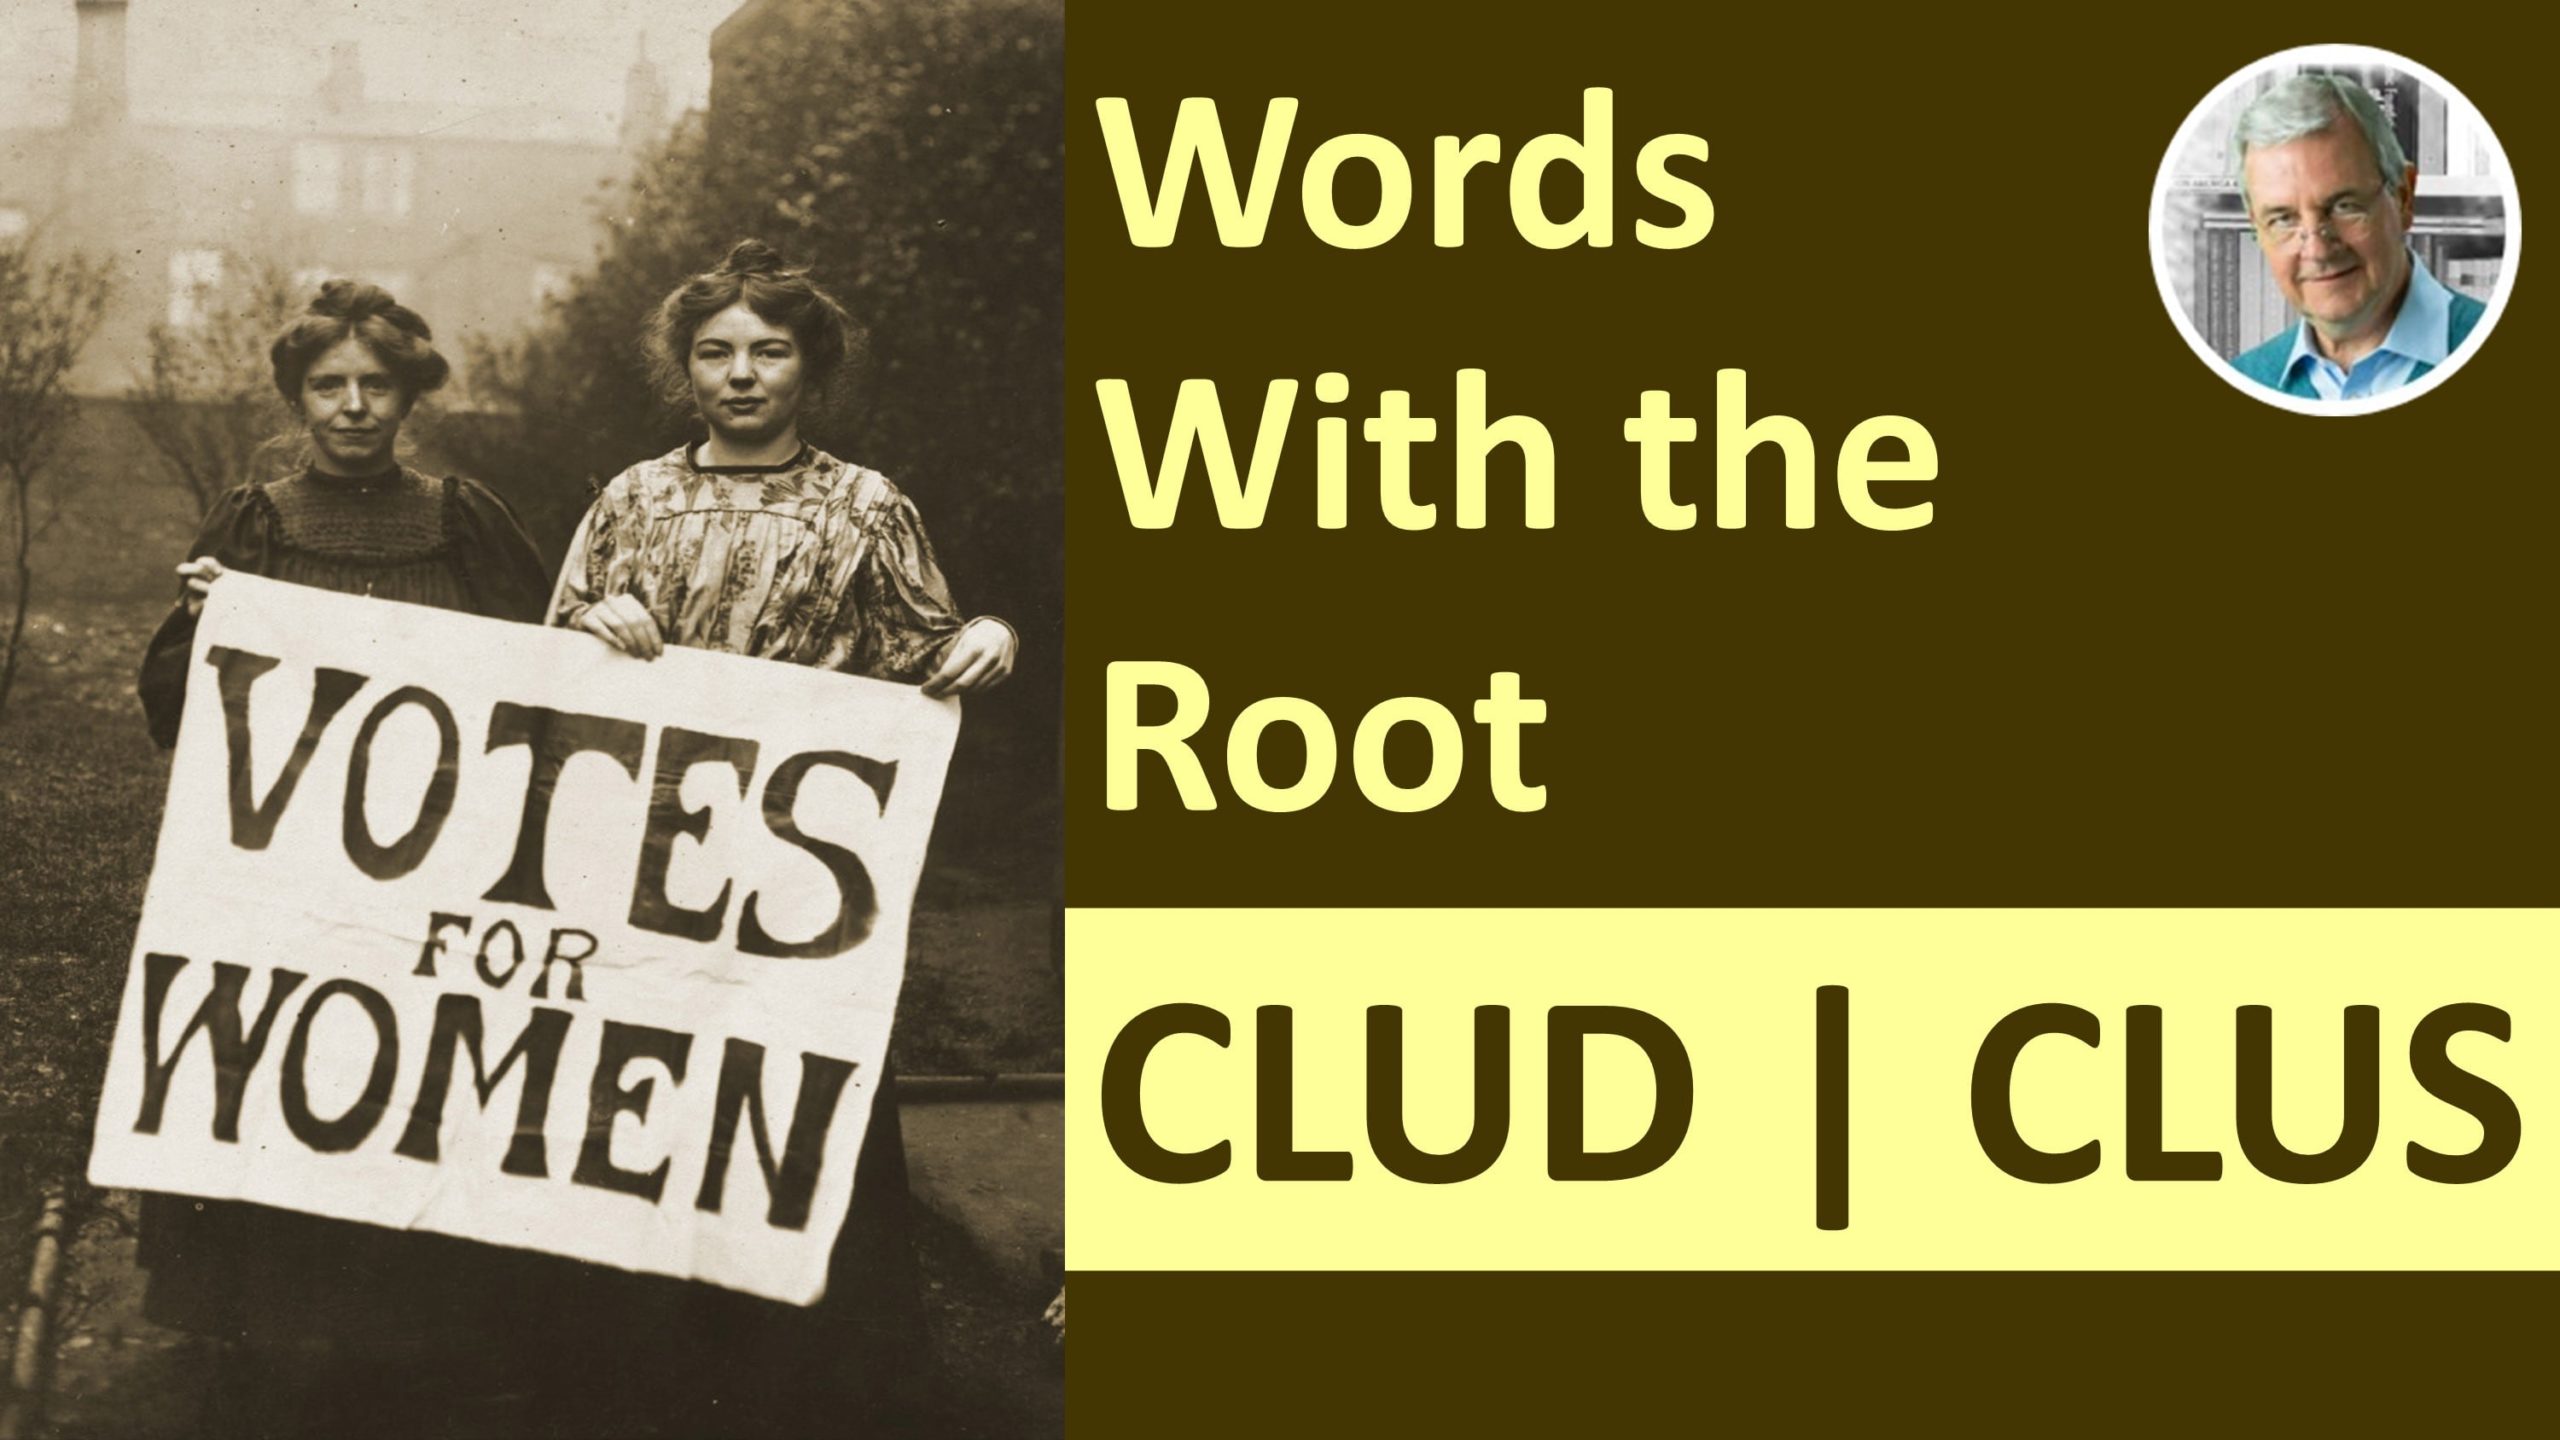 clus-clud-root-word-examples